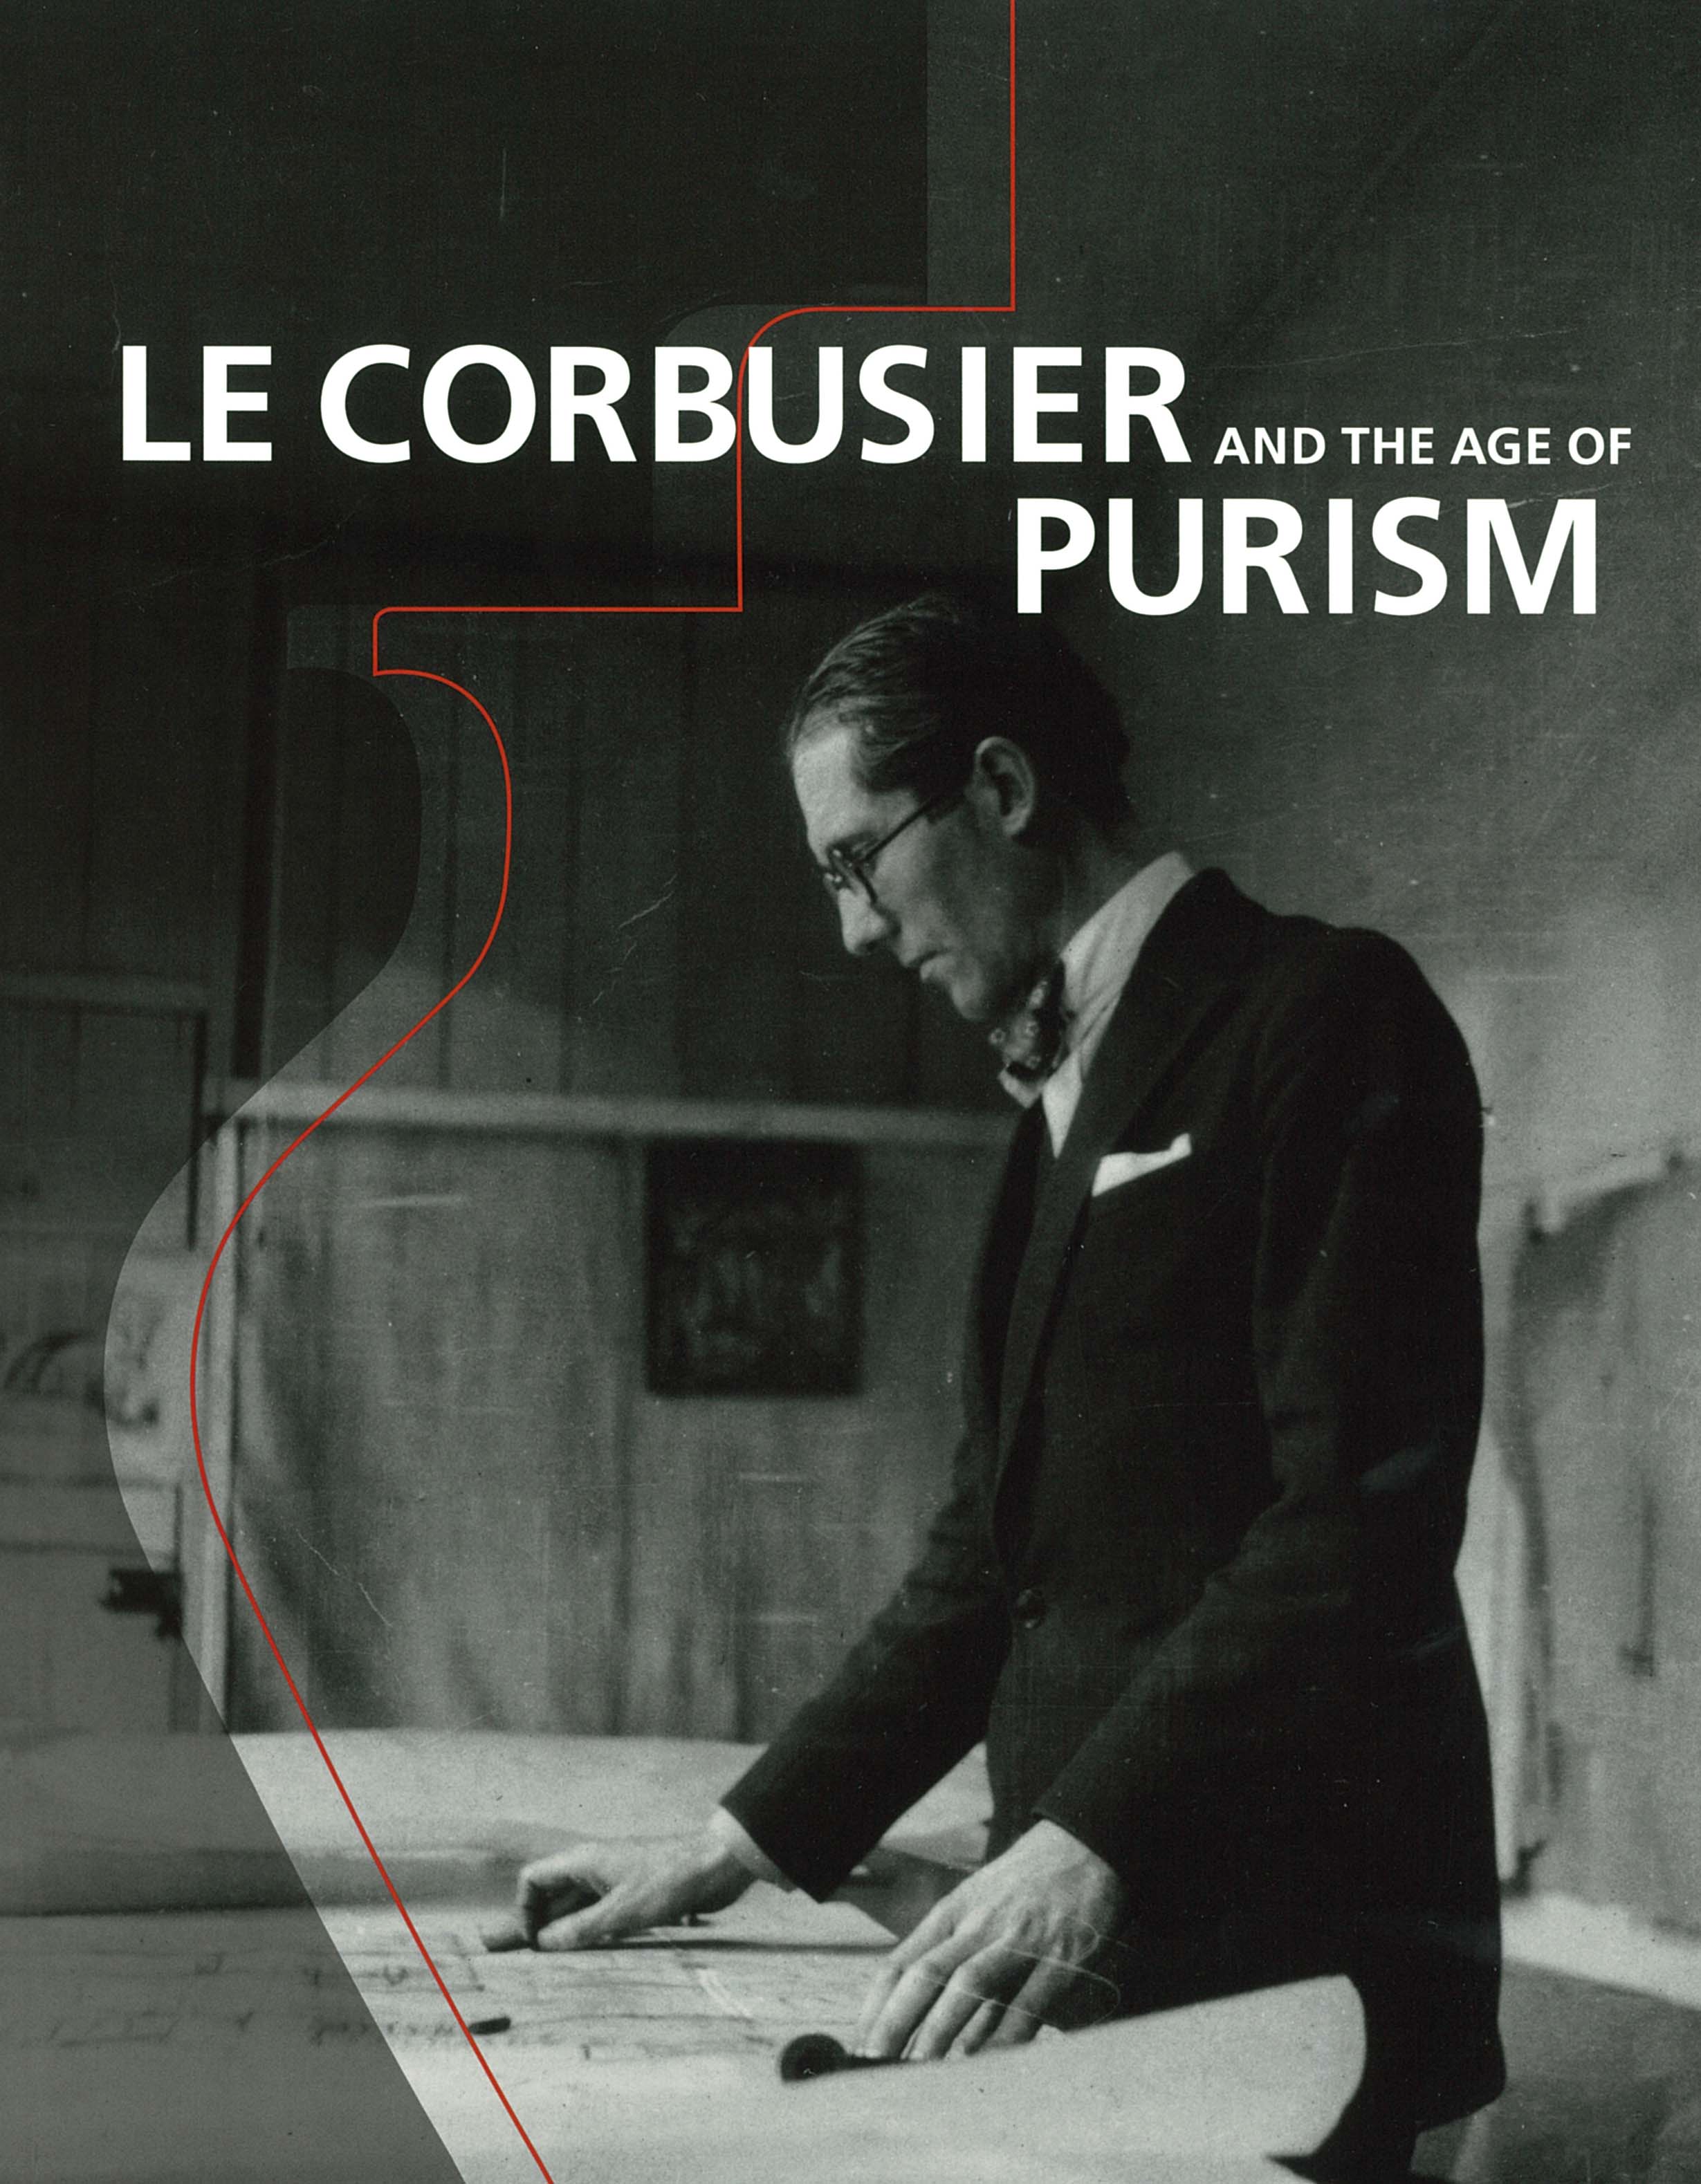 Le Corbusier and the age of purism